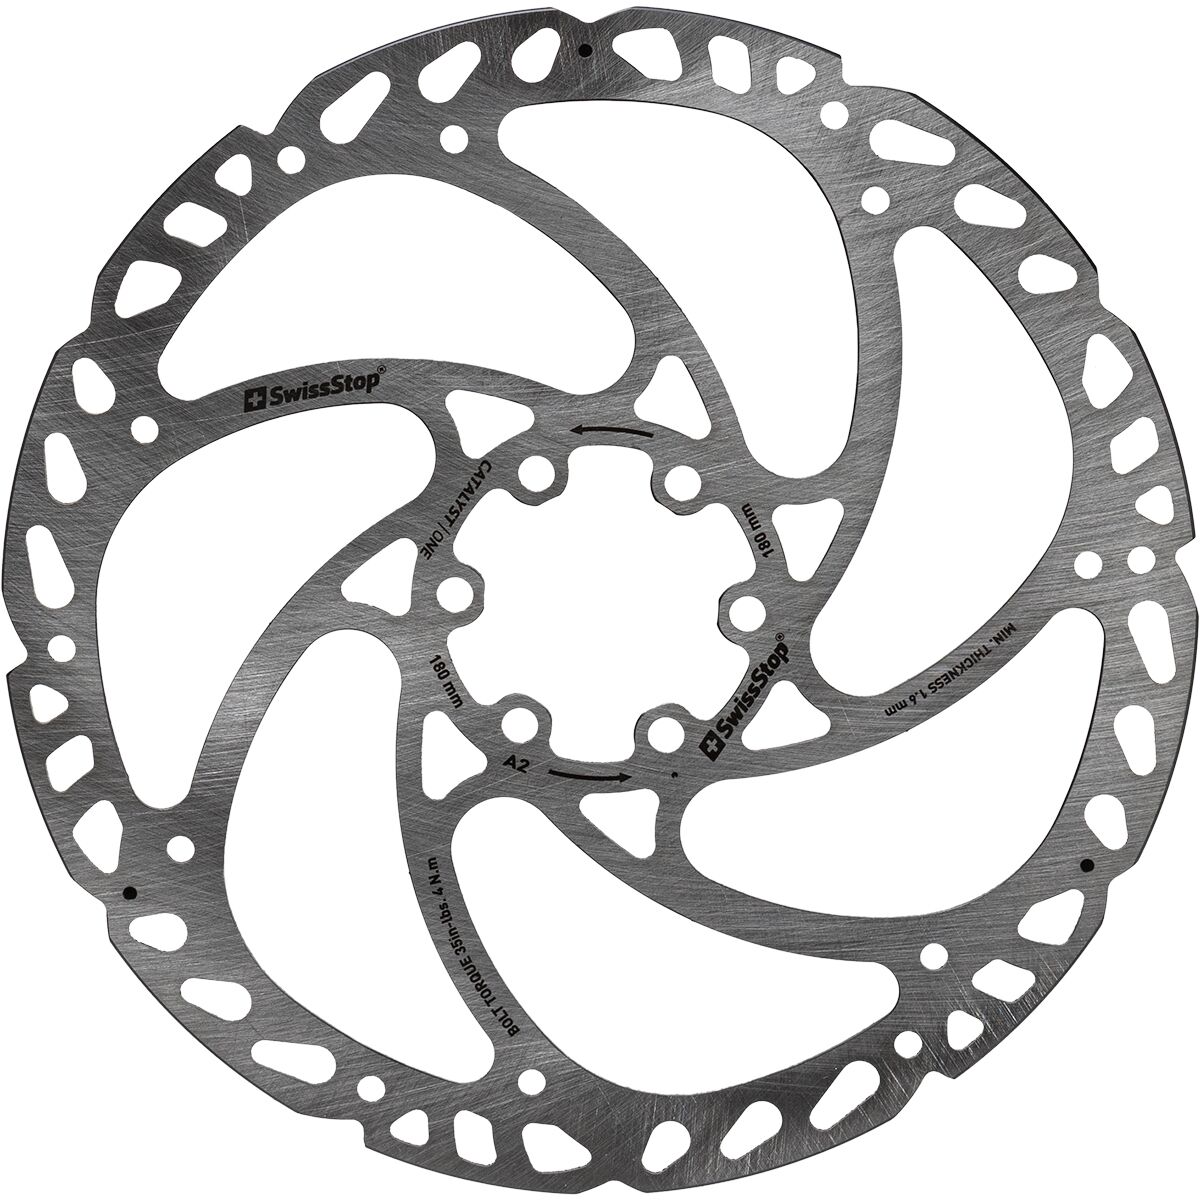 SwissStop Catalyst One Disc Rotor - 6 Bolt